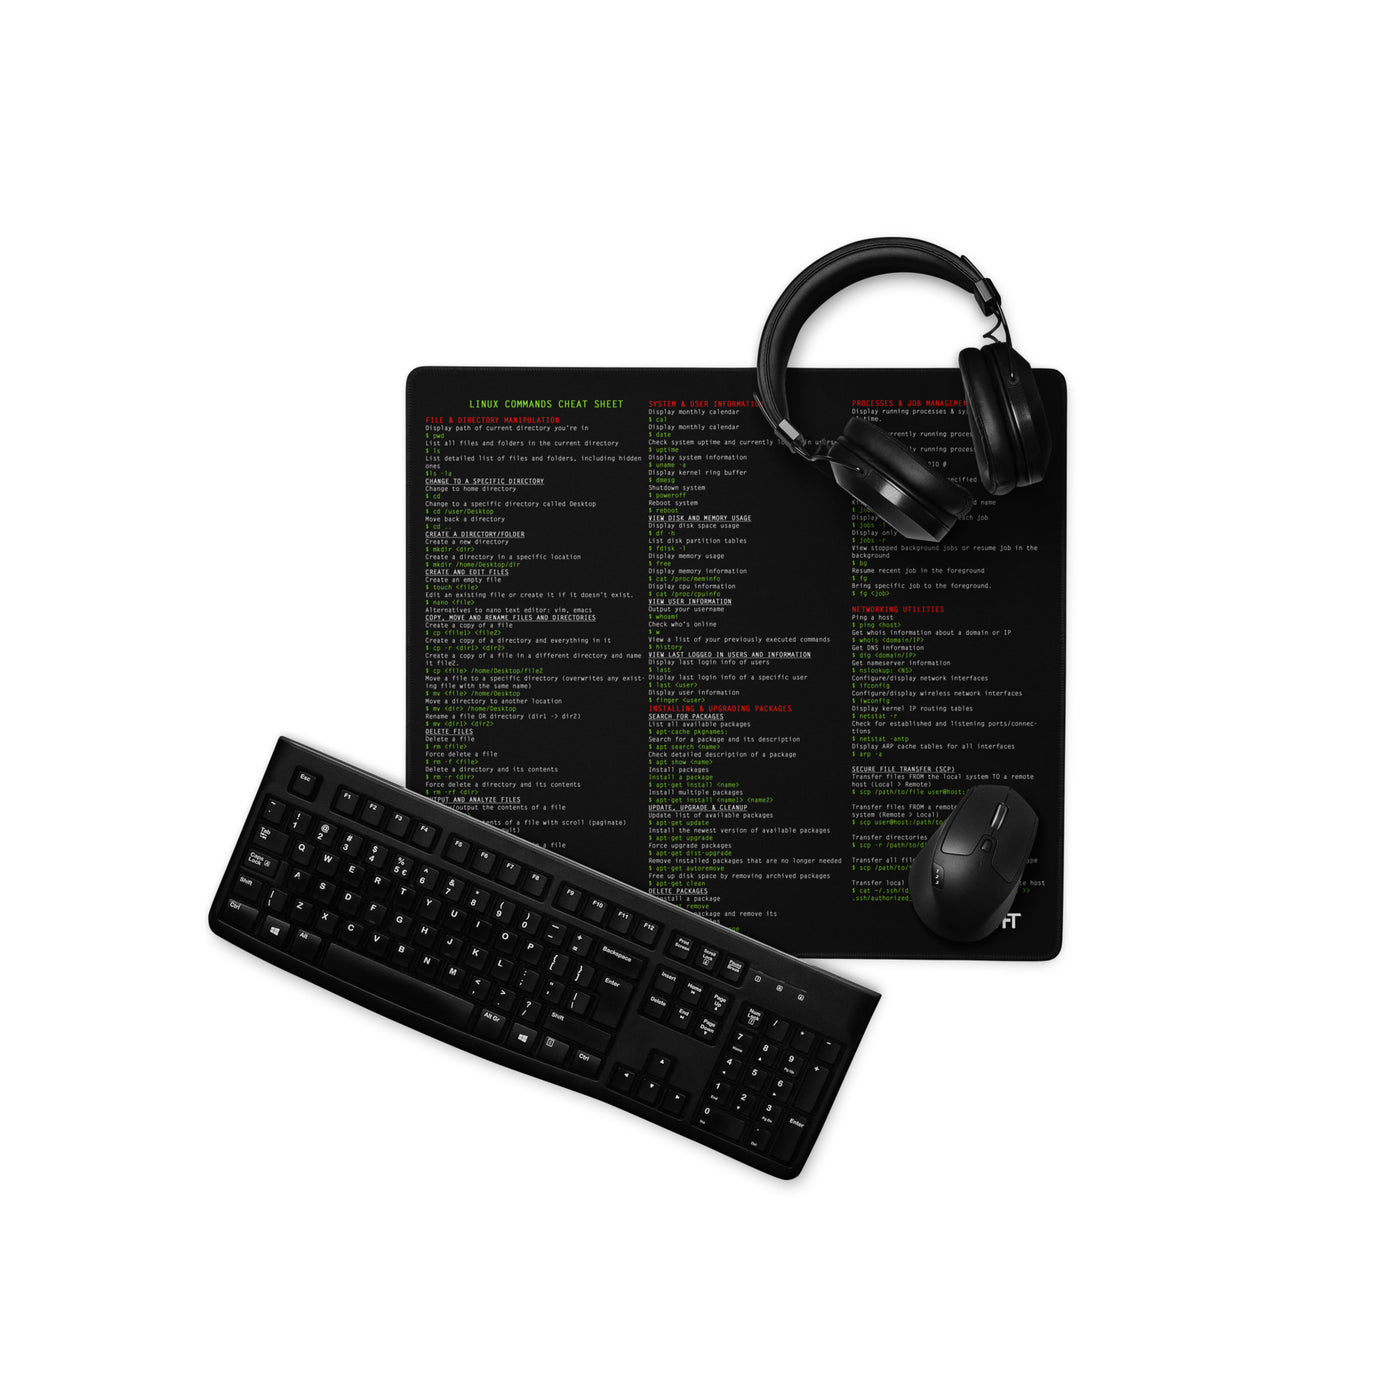 Linux Cheat Sheet - mouse pad